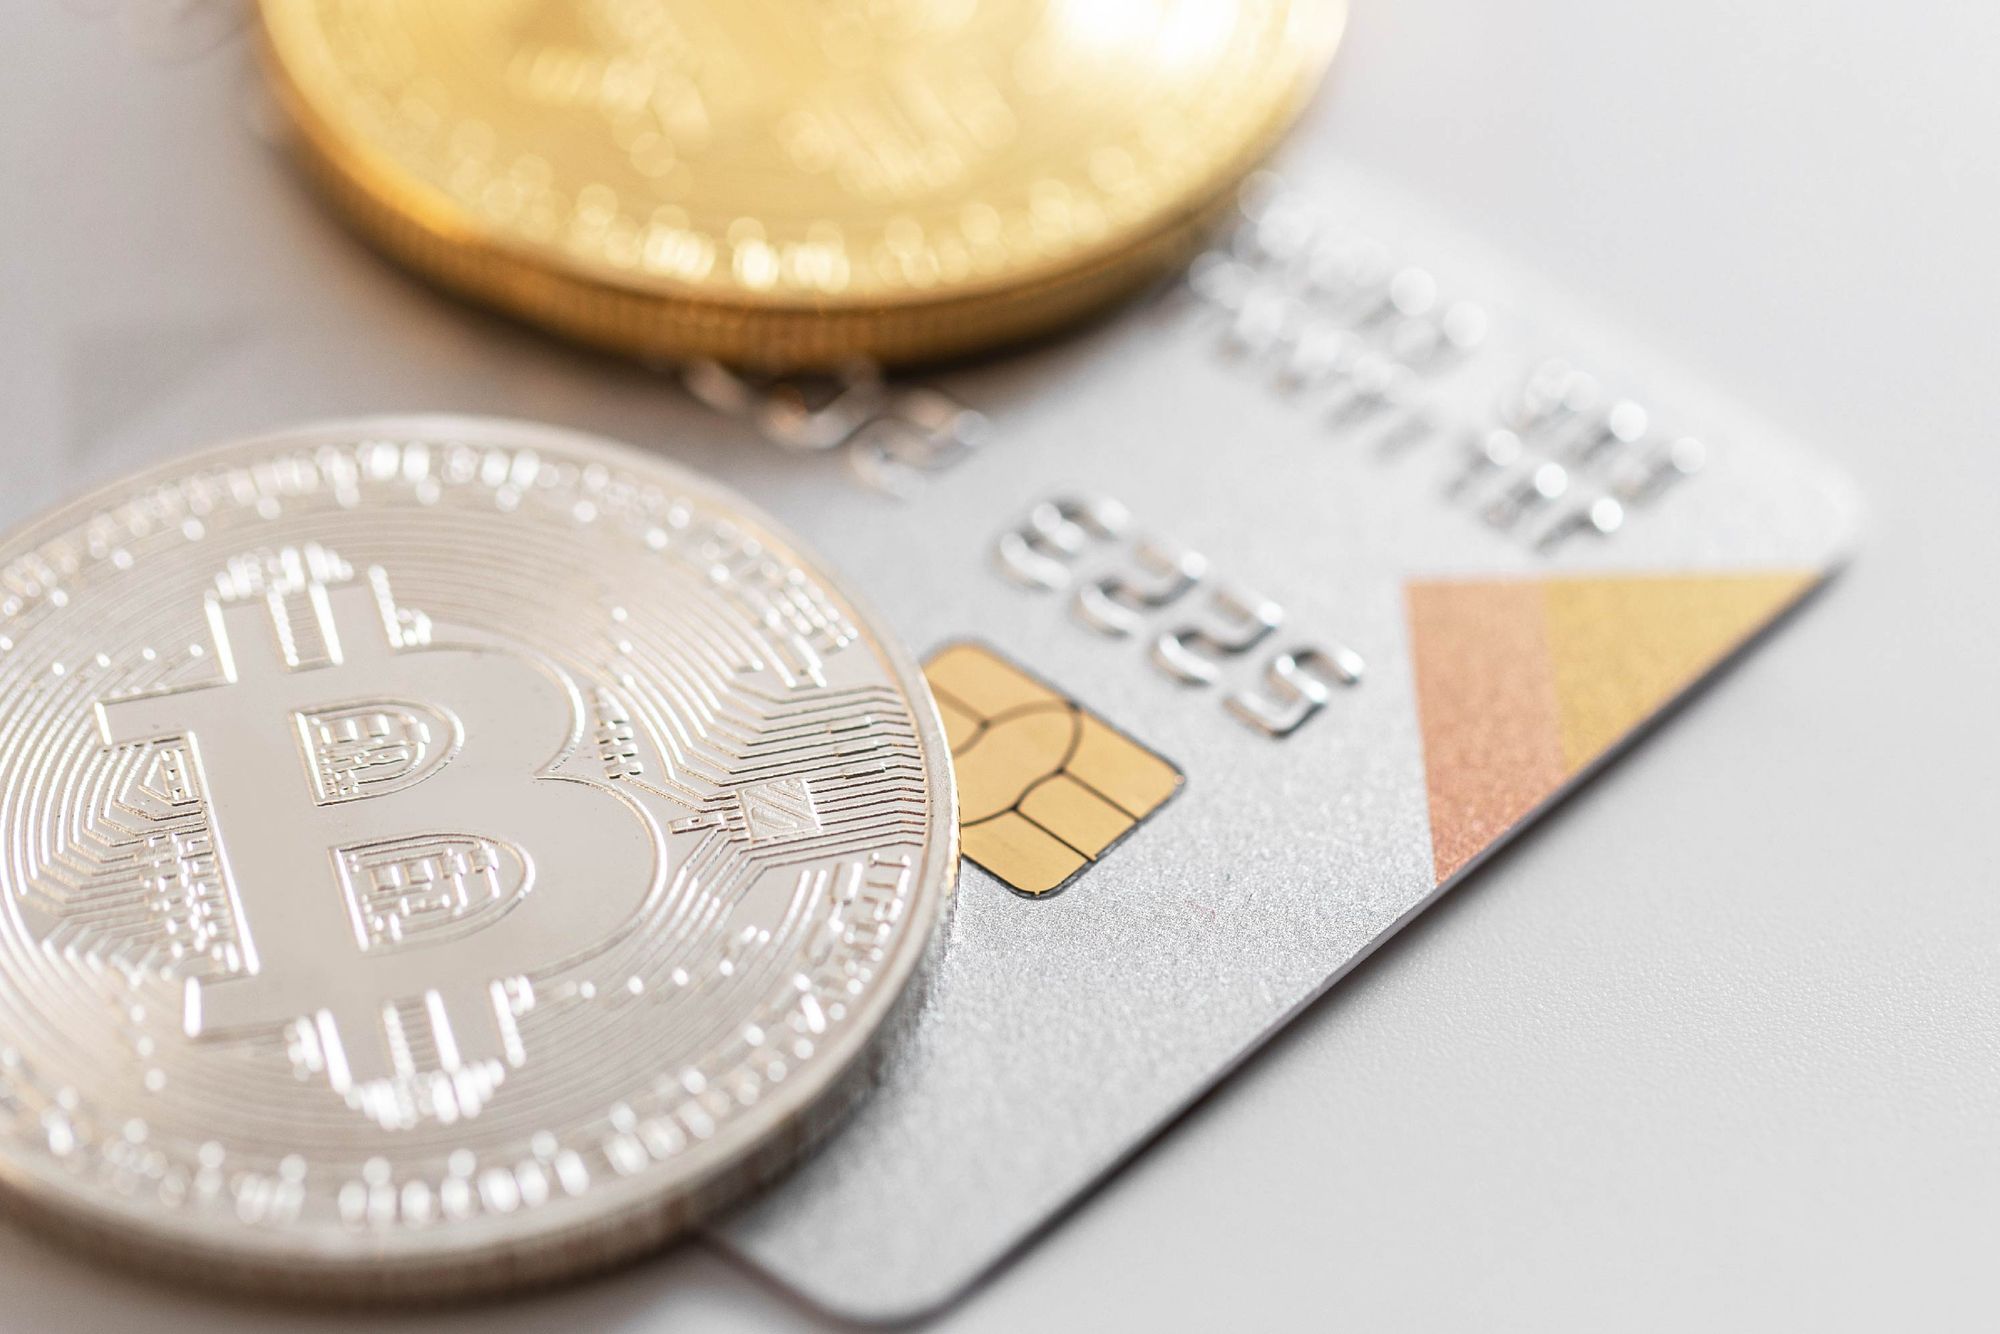 Visa wants to involve consumers in the crypto economy through a new Bitcoin Rewards Credit Card